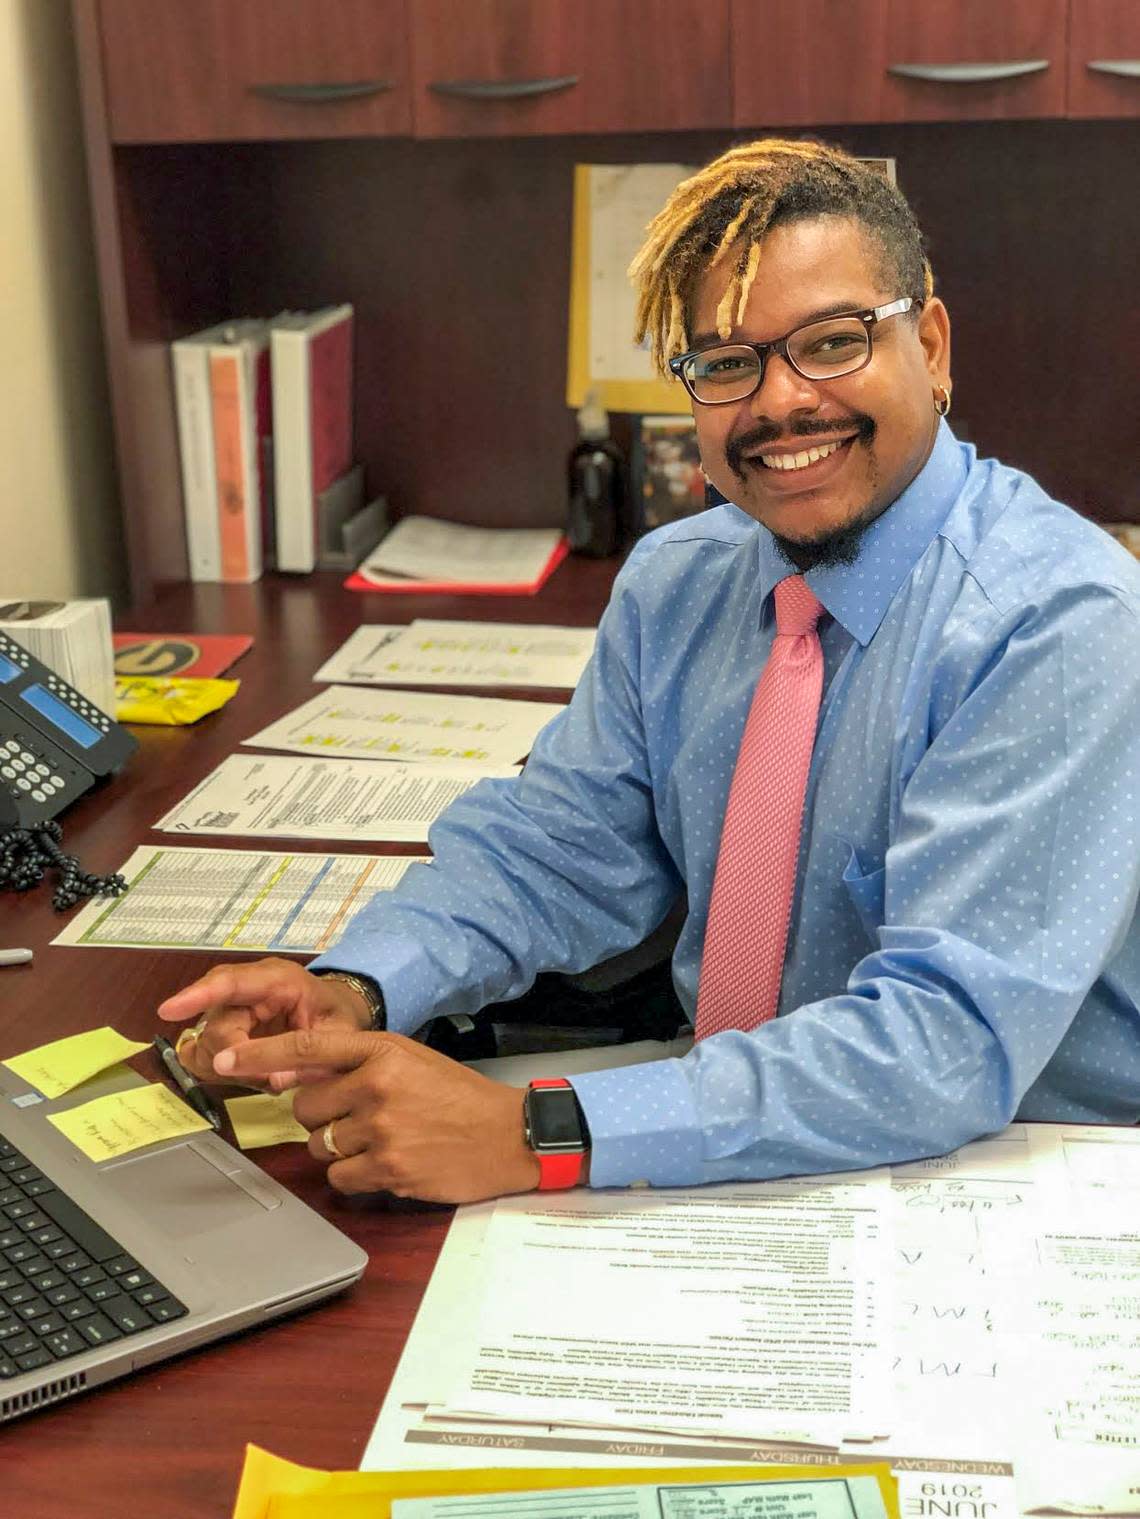 Qaadir Phillips submitted this recent photograph of himself at his desk at M.C. Riley Elementary School in Bluffton. Phillips, an employee of the Beaufort County School District, is a data specialist for the school.